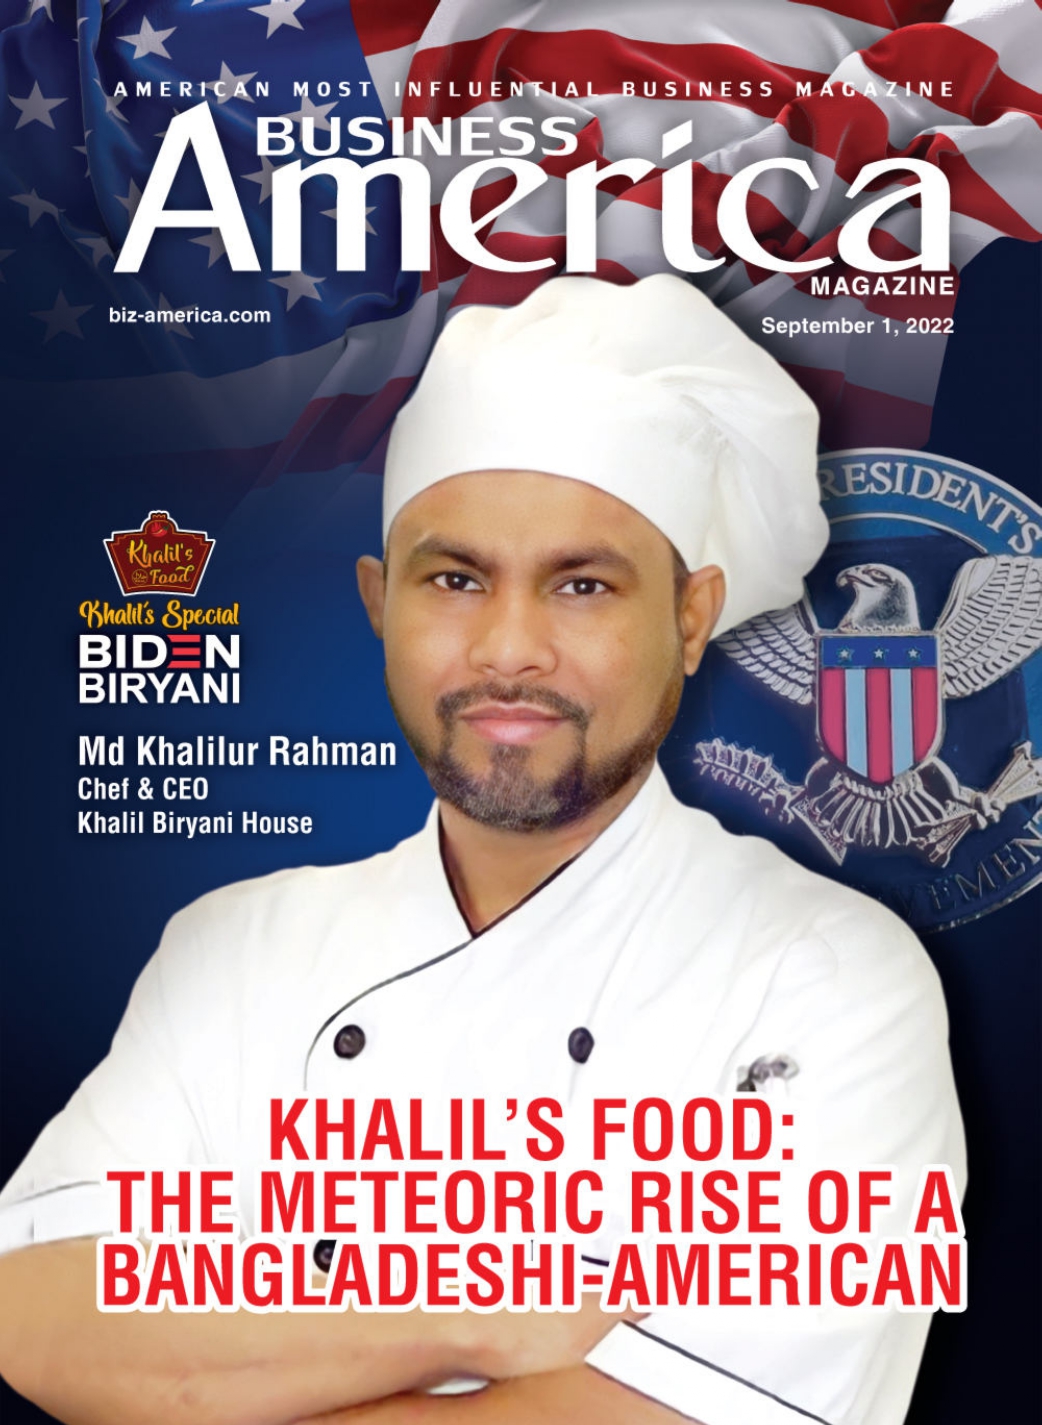 Khalil’s Food:The Meteoric Rise Of a Bangladeshi-American